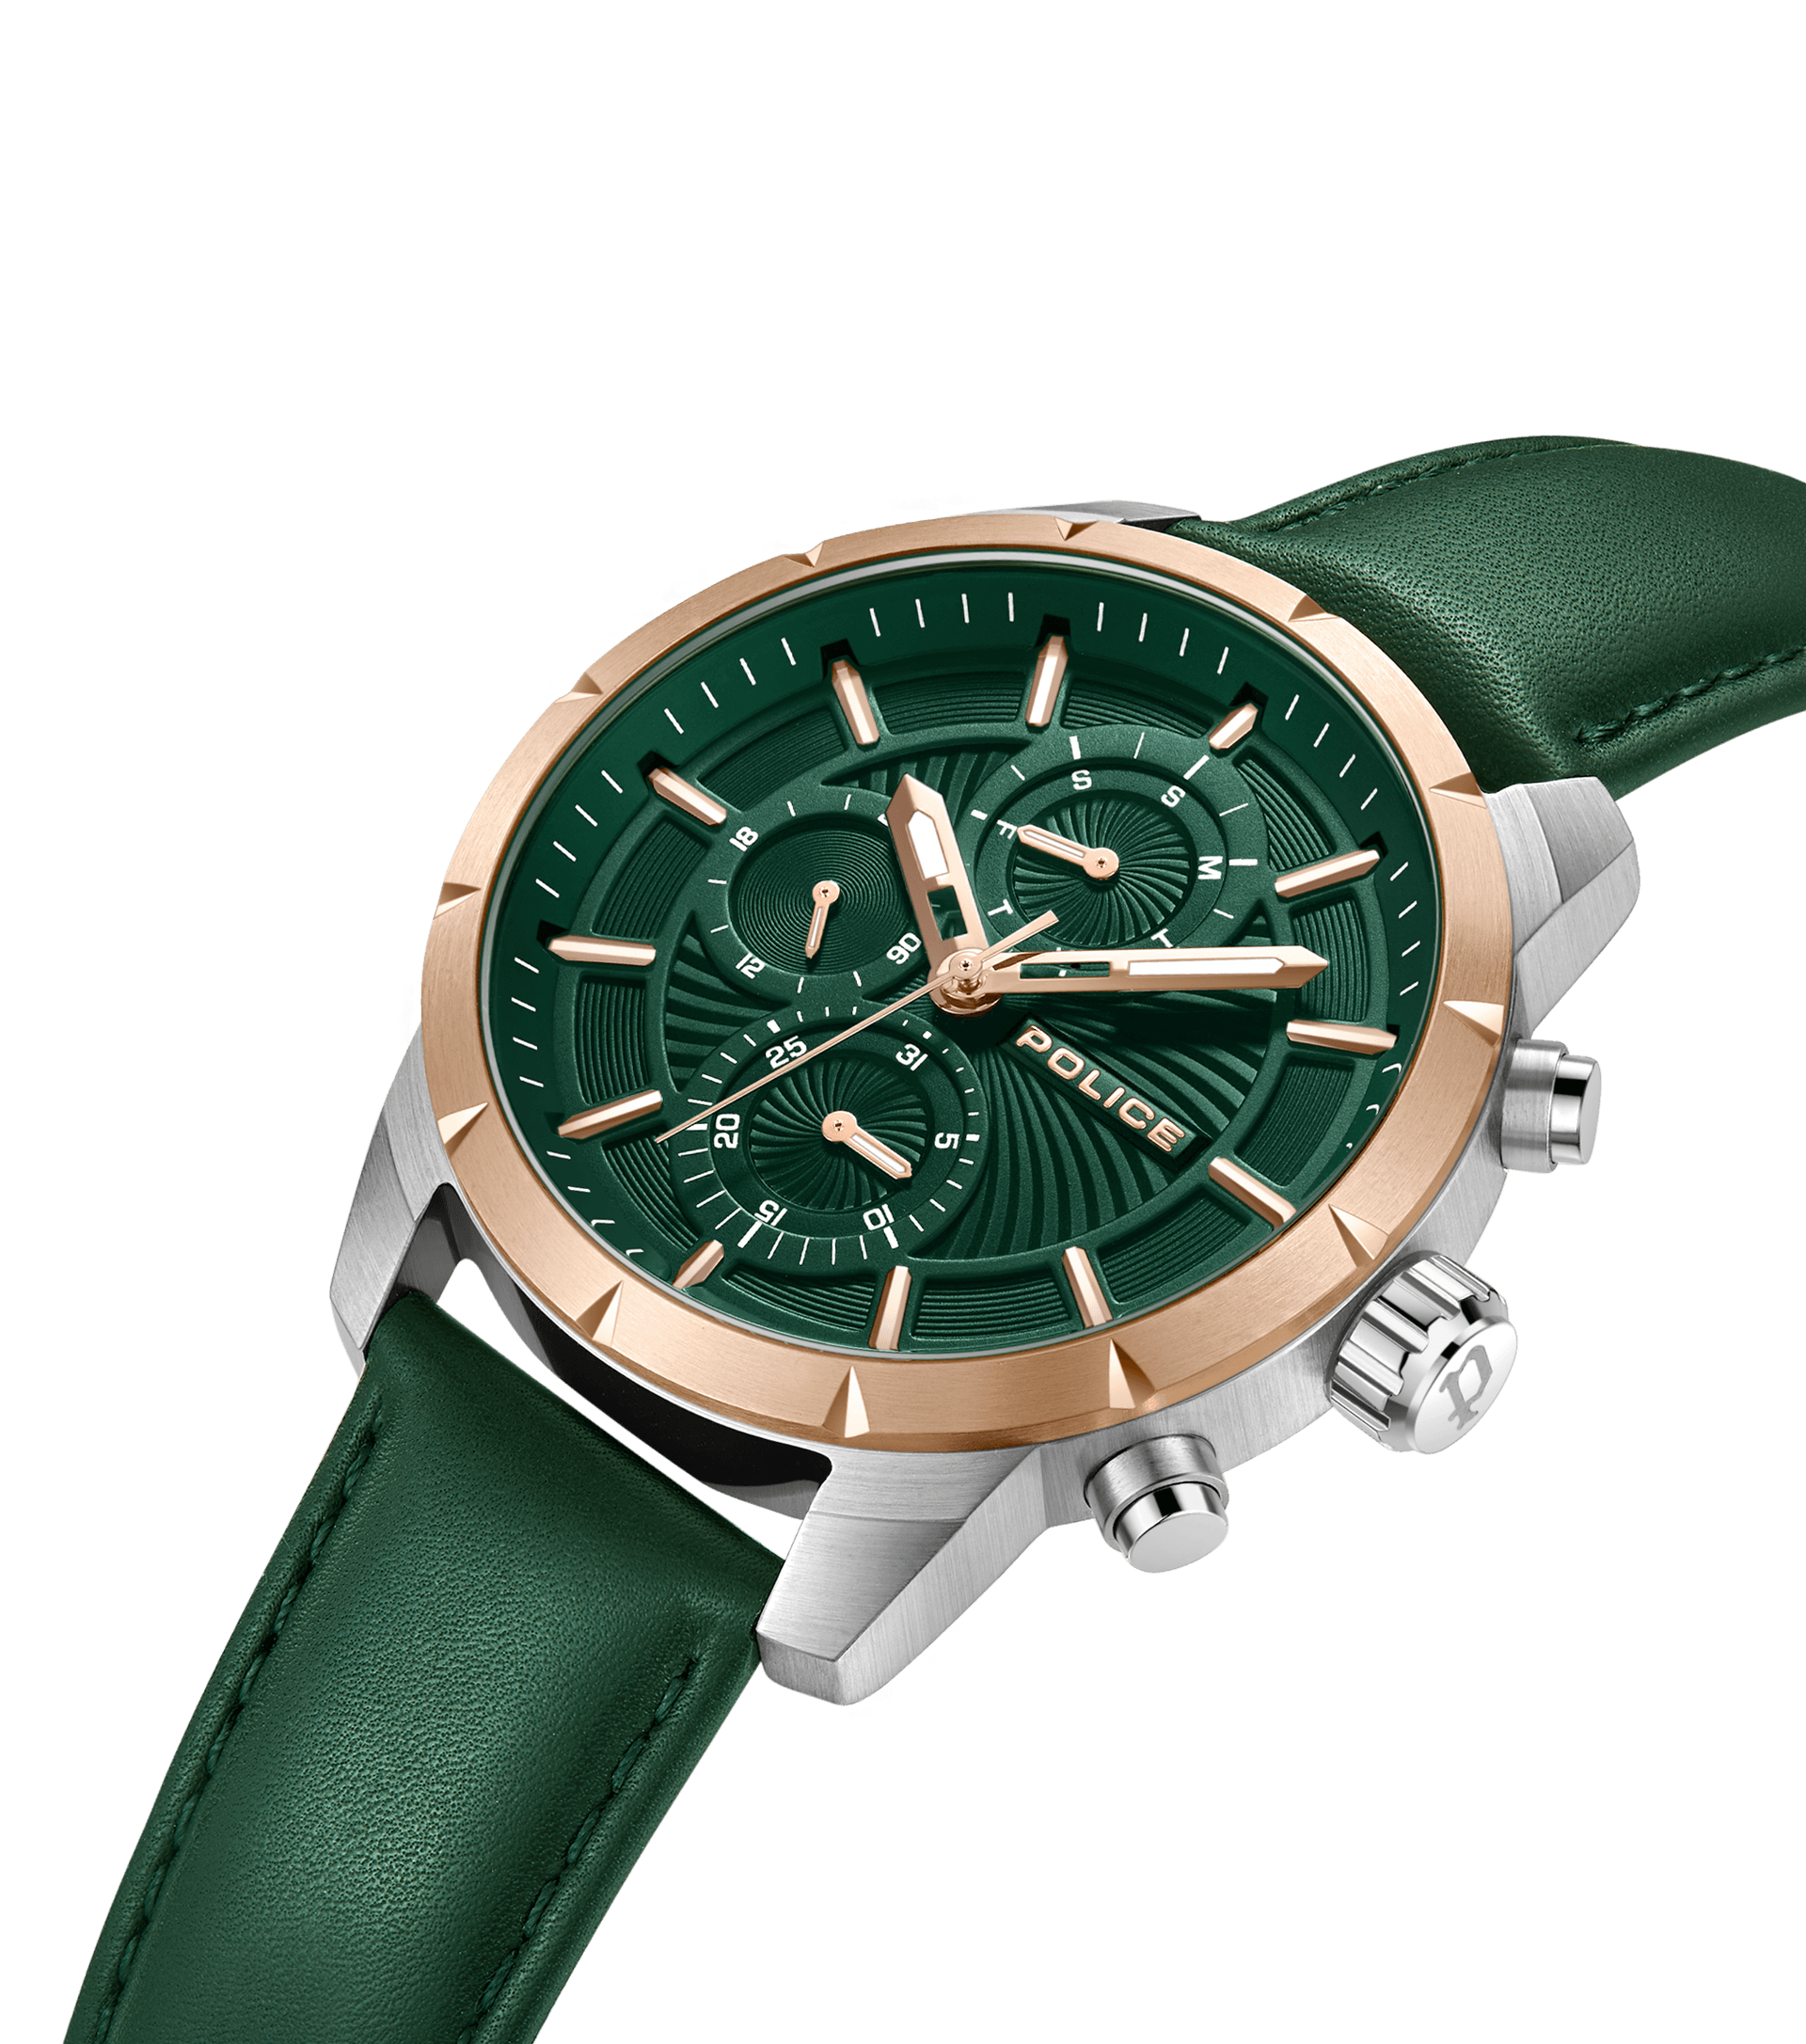 Police watches Watch Men - For Silverandrosegold Green, By Police Neist